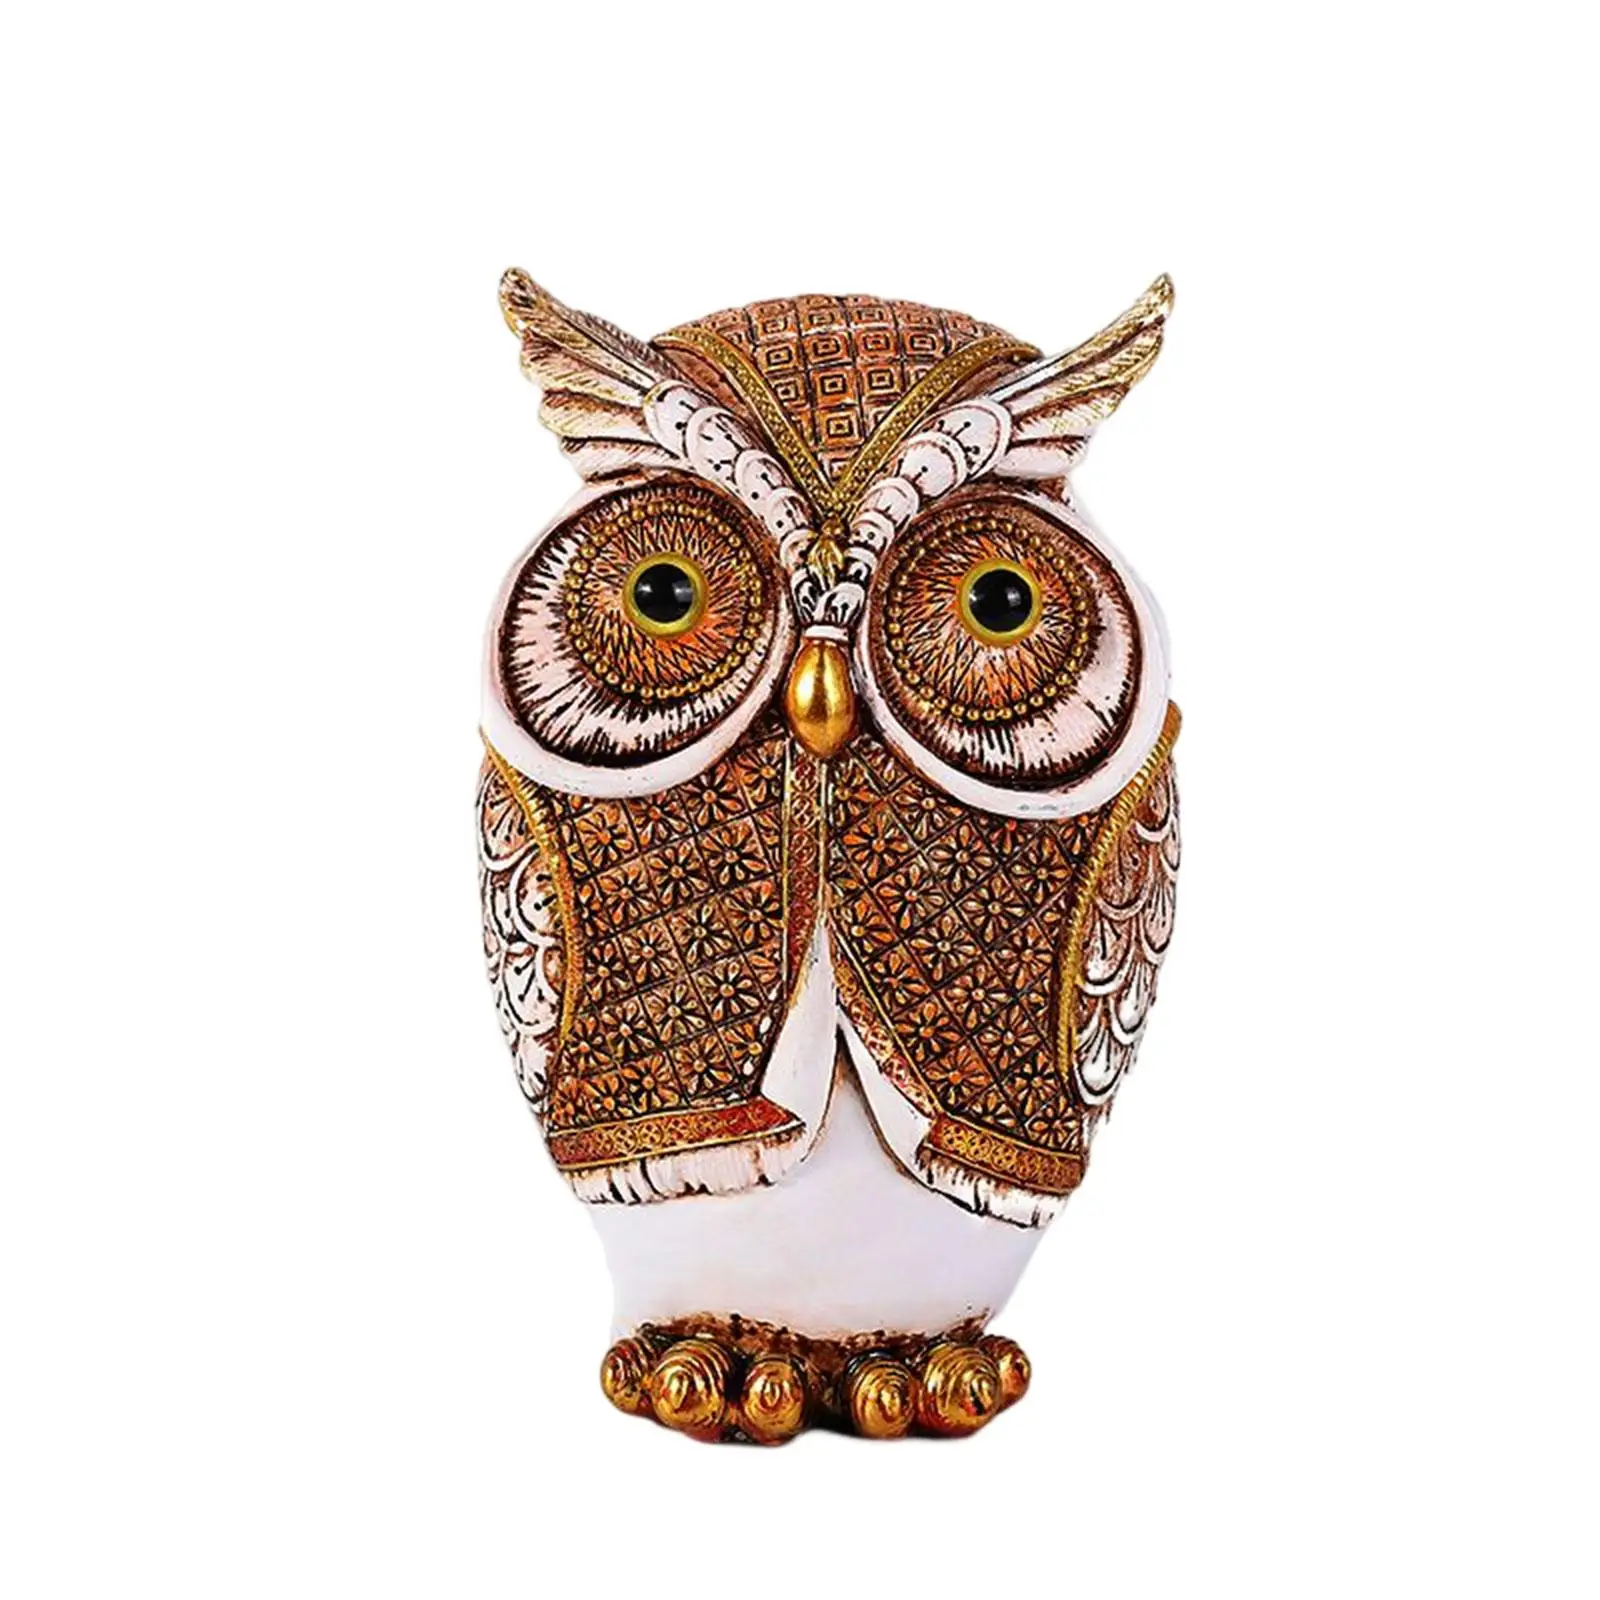 European owl Statue Gifts resin Ornament Realistic Crafts Decor Animal Statue for Home Bathroom Car Office Living Room